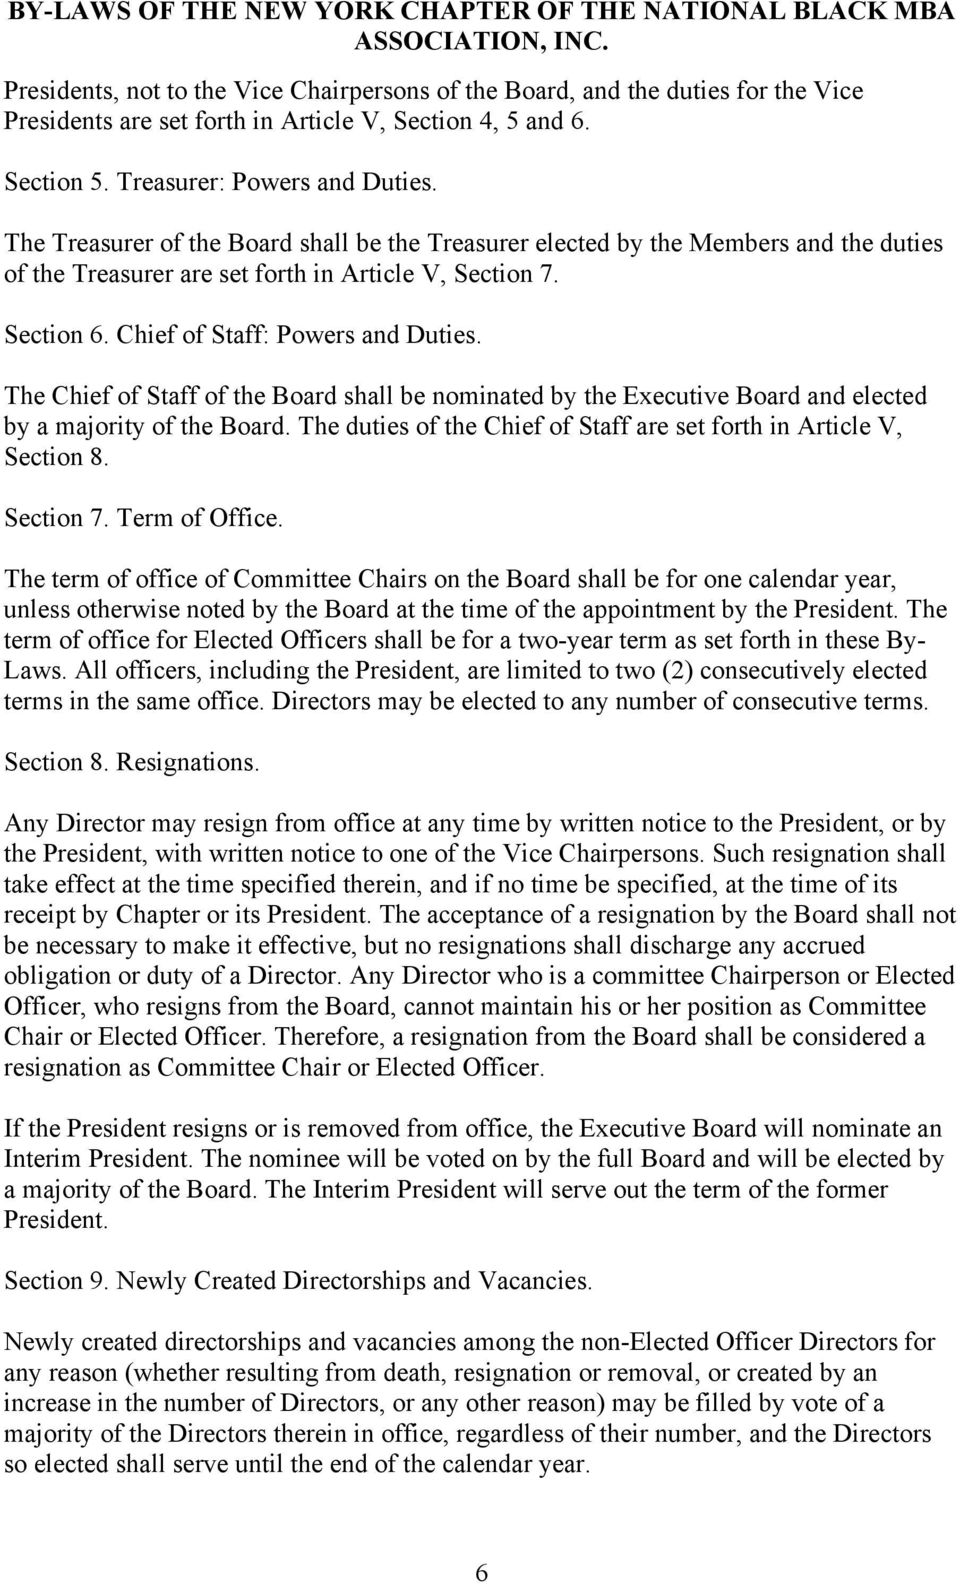 The Chief of Staff of the Board shall be nominated by the Executive Board and elected by a majority of the Board. The duties of the Chief of Staff are set forth in Article V, Section 8. Section 7.